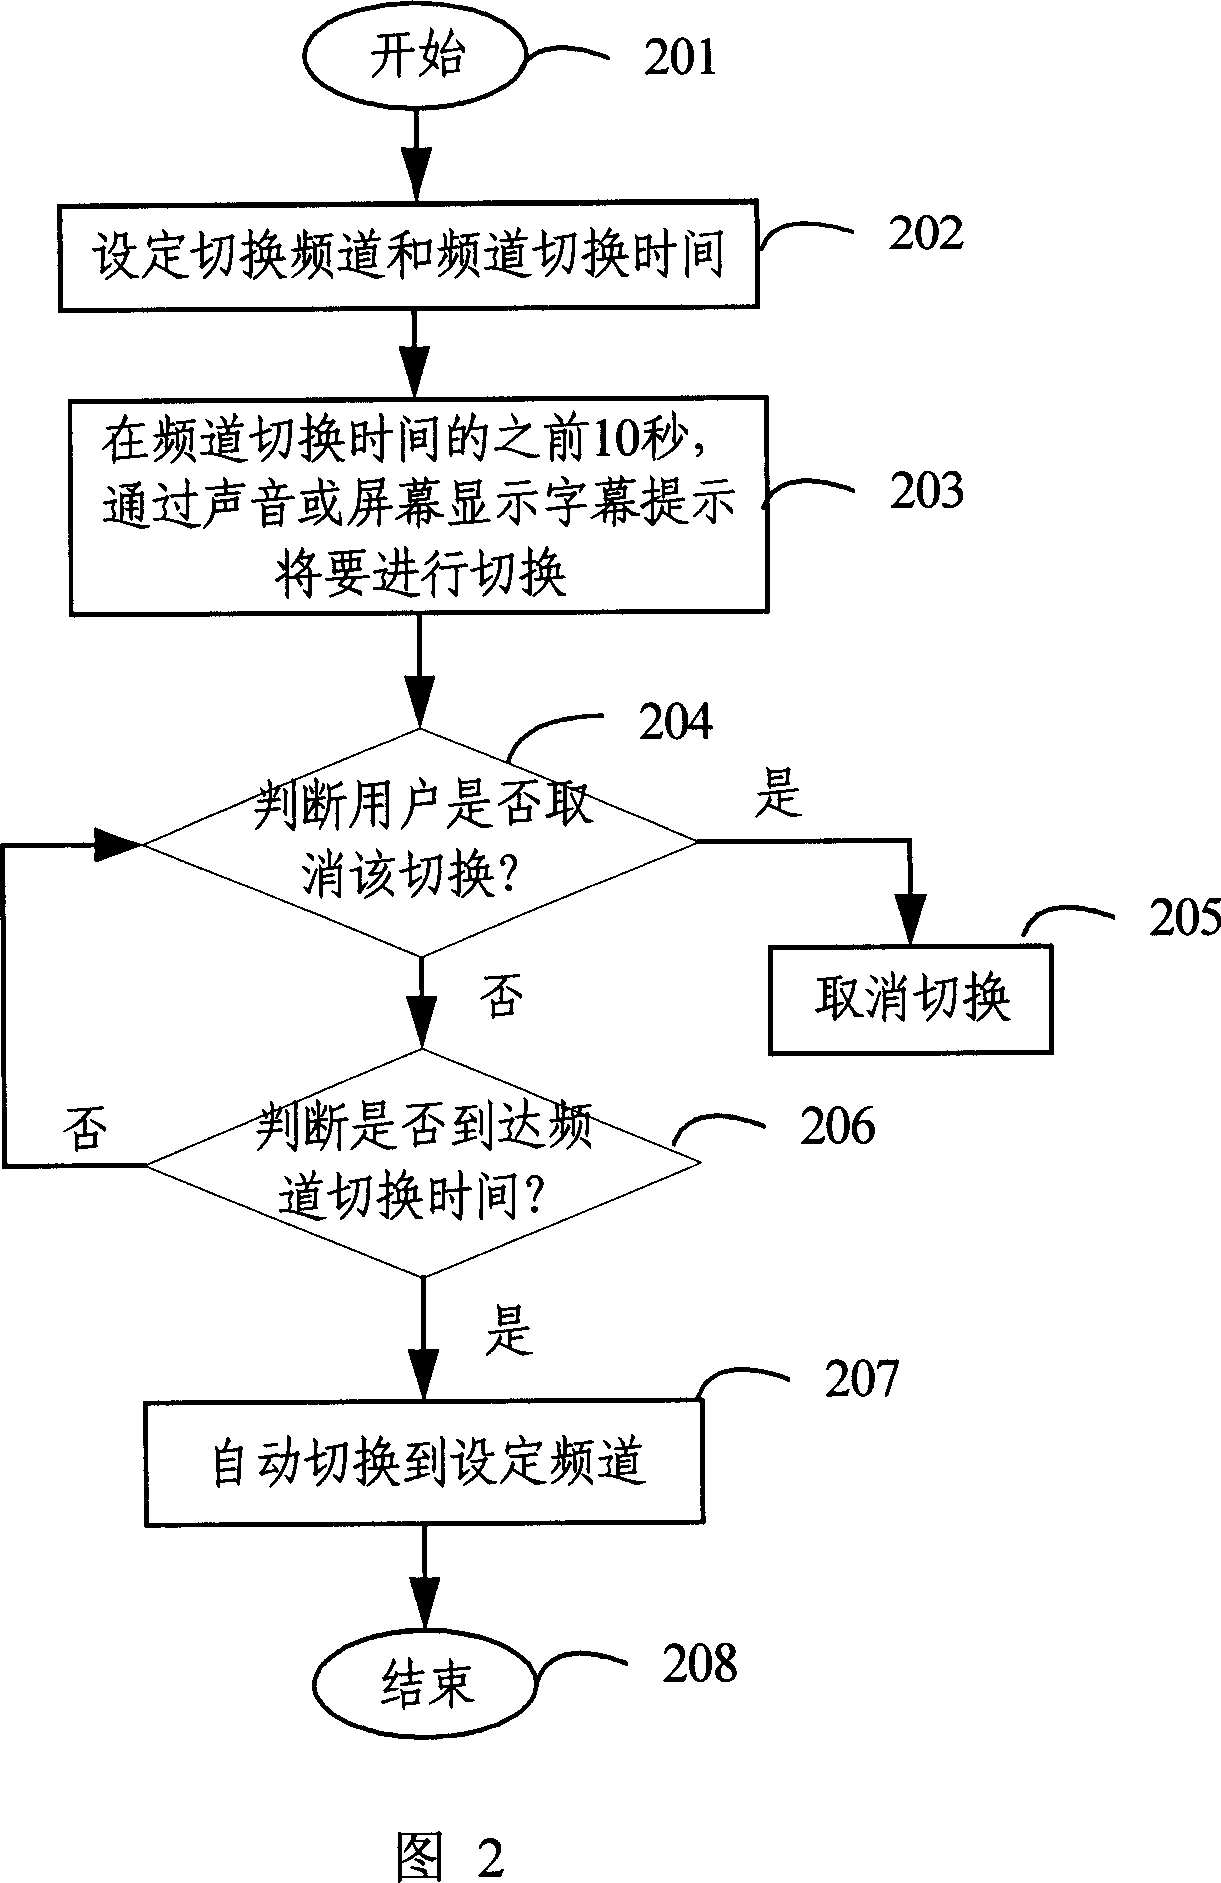 Automatic television channel switching method and system